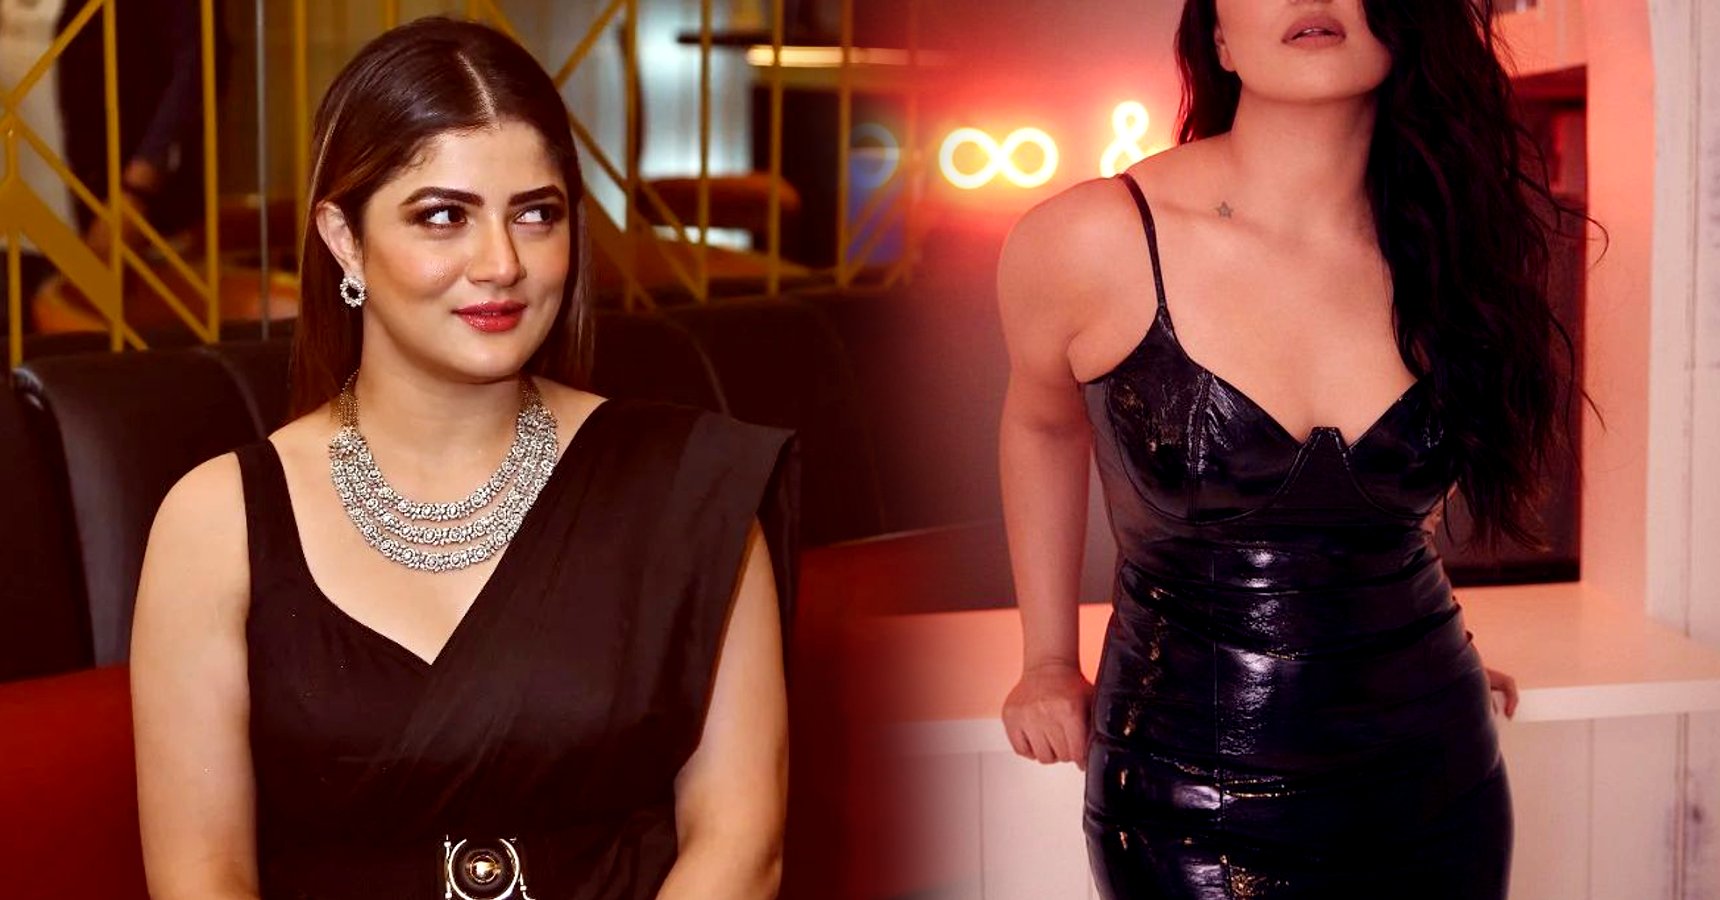 Srabanti Chatterjee's sister might beat her in terms of beauty